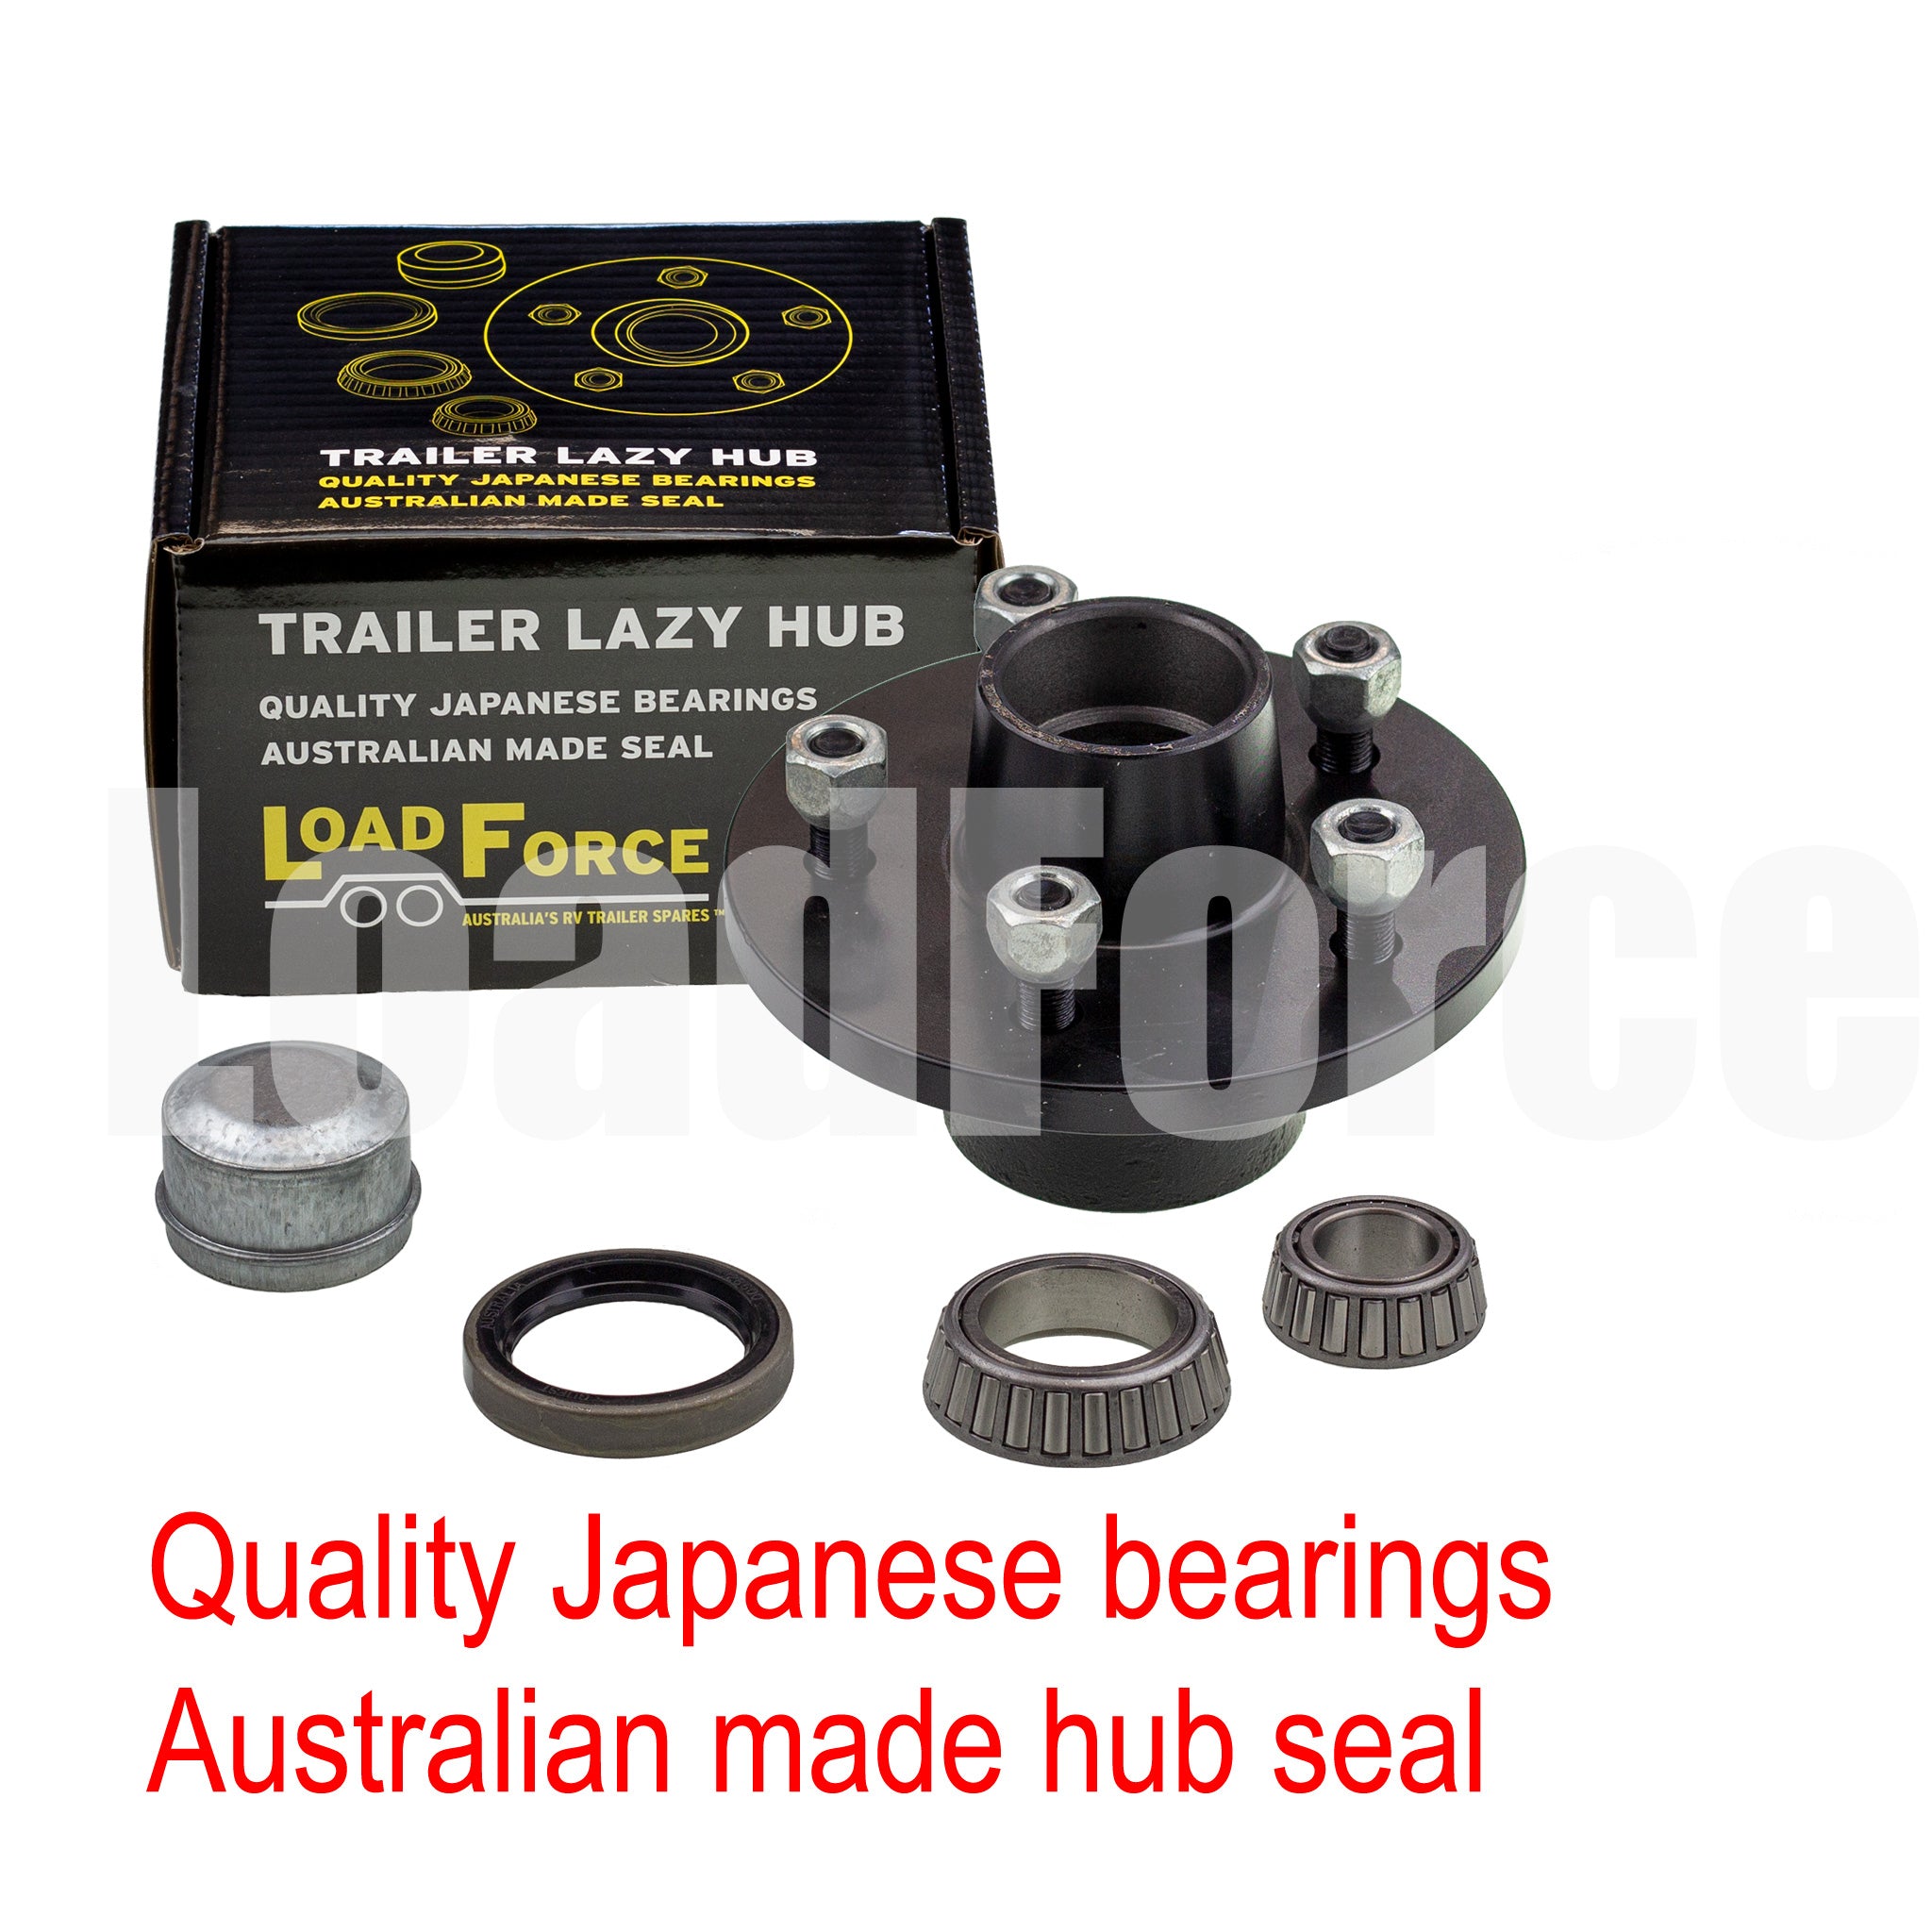 LoadForce 6 inch lazy hub assembly Commodore 5 stud slimline (Ford) bearing